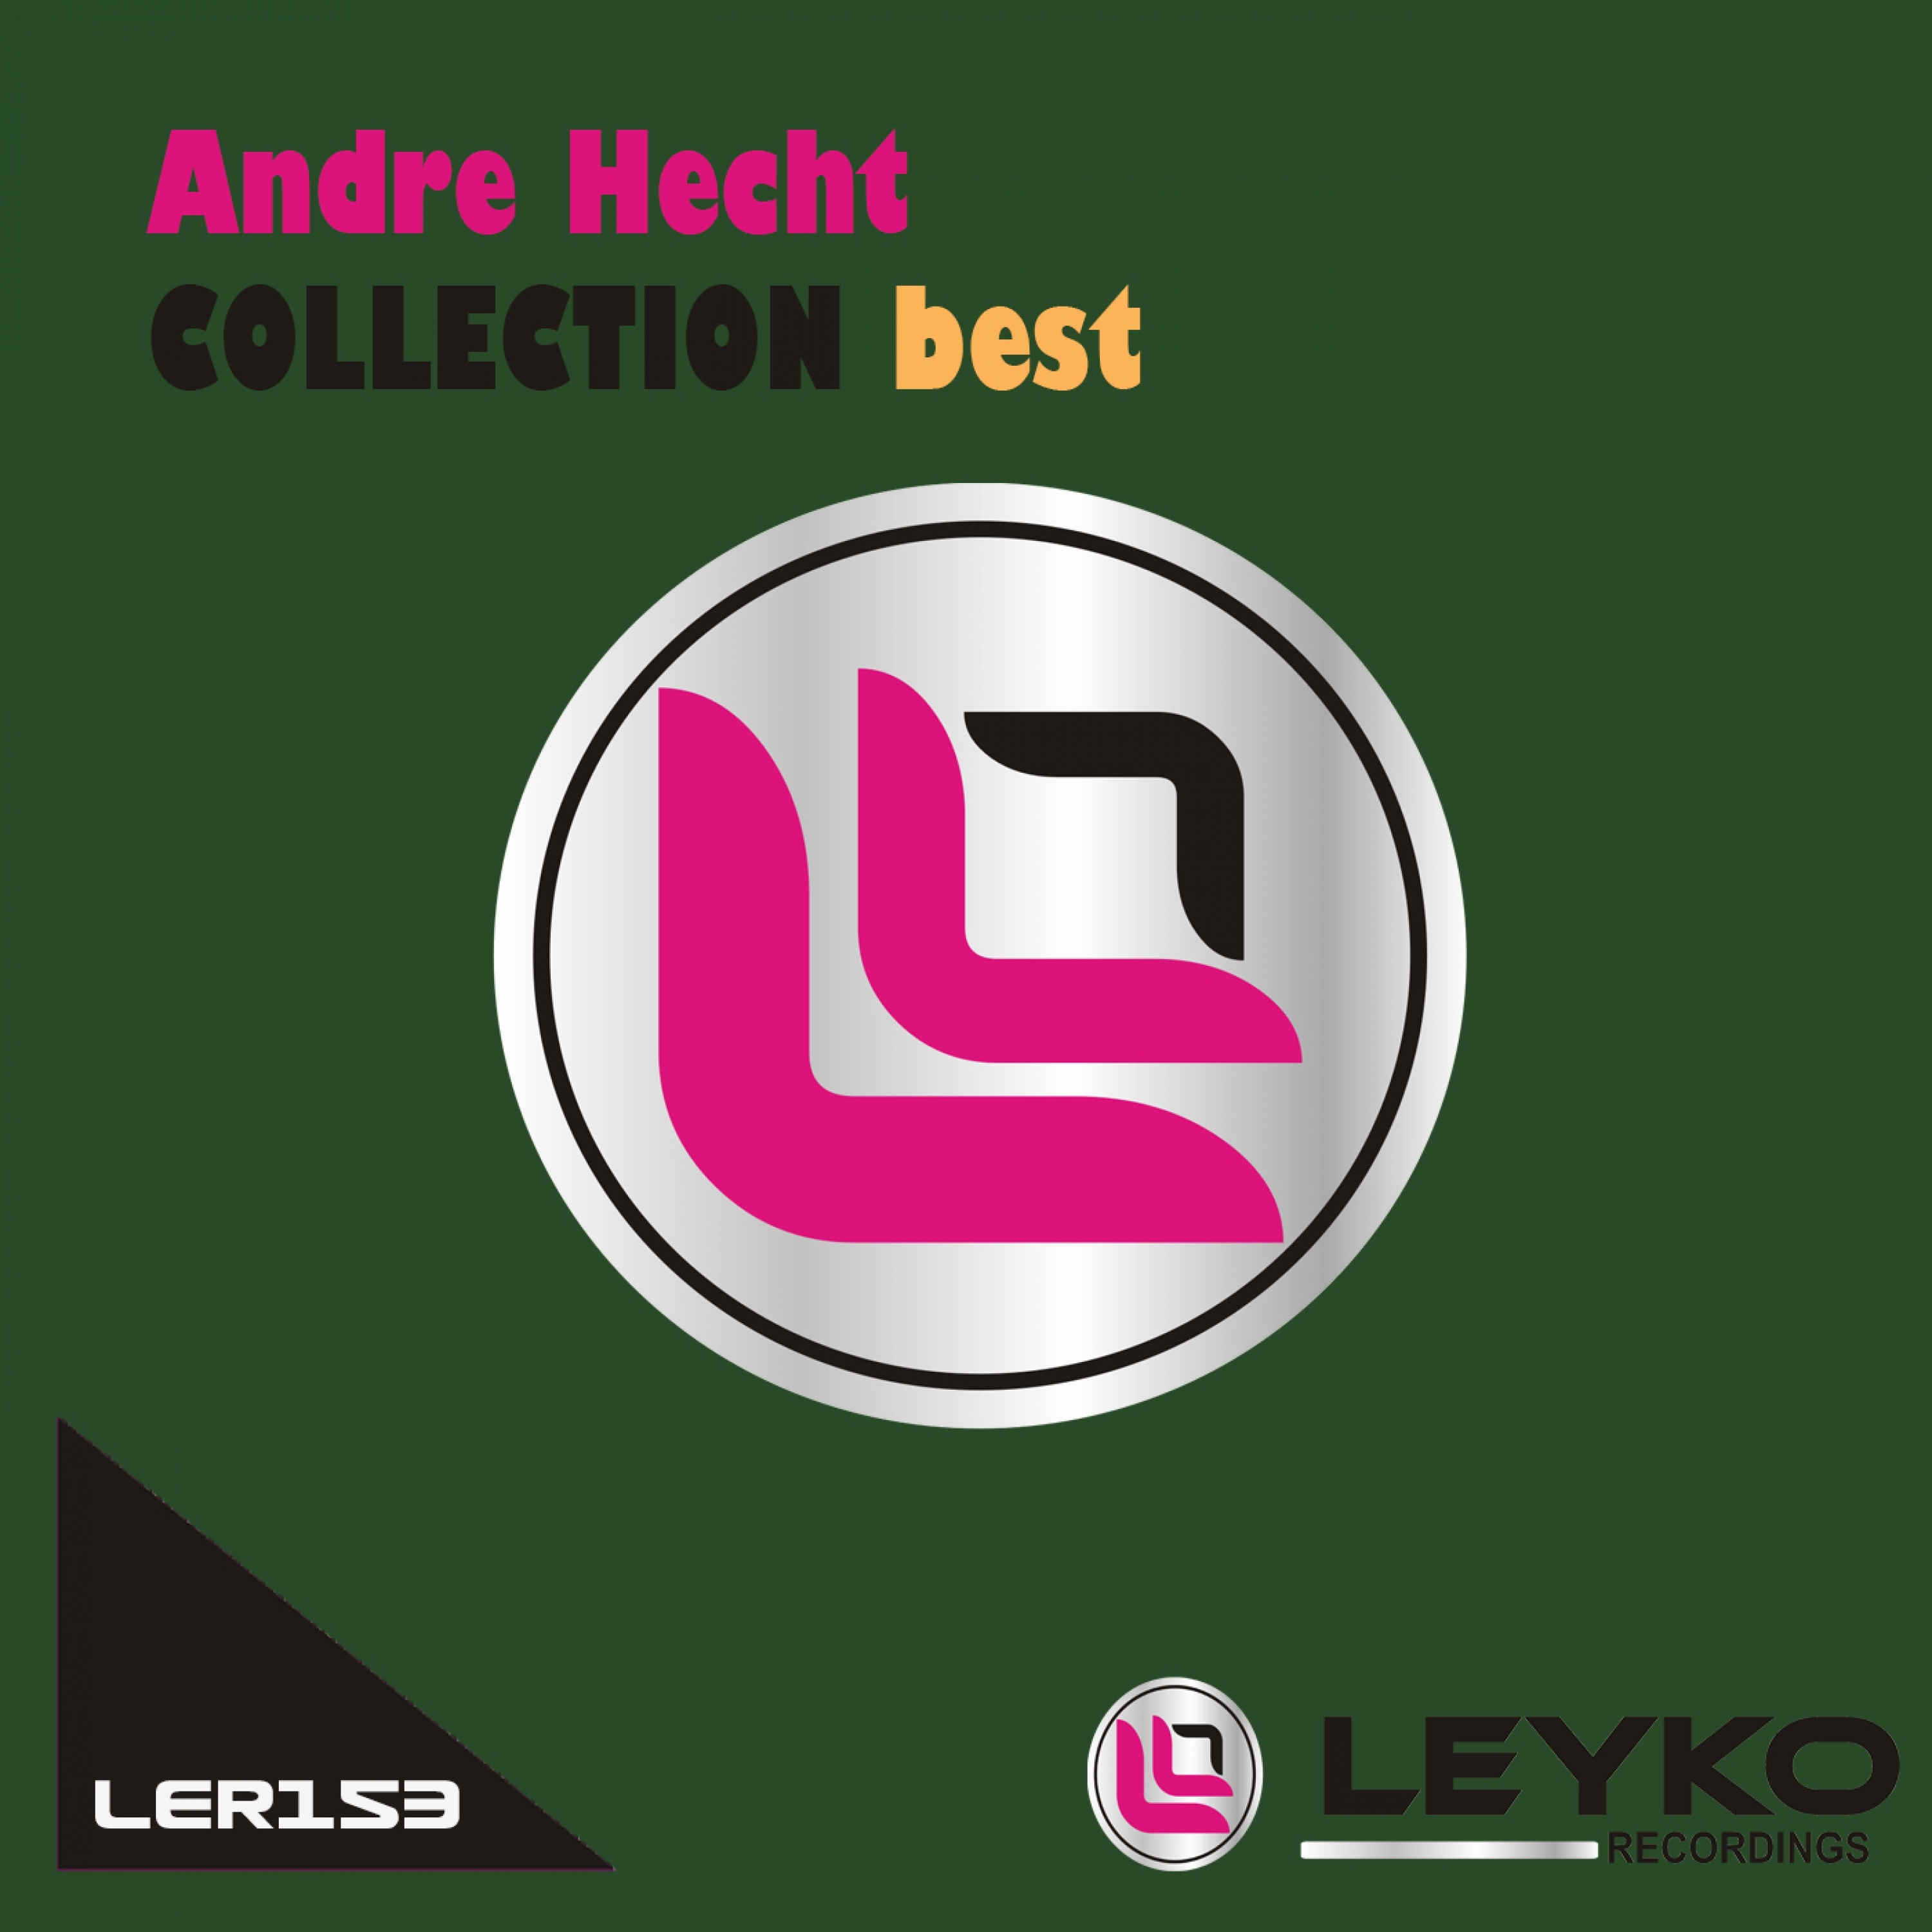 Andre Hecht's Collection - Best